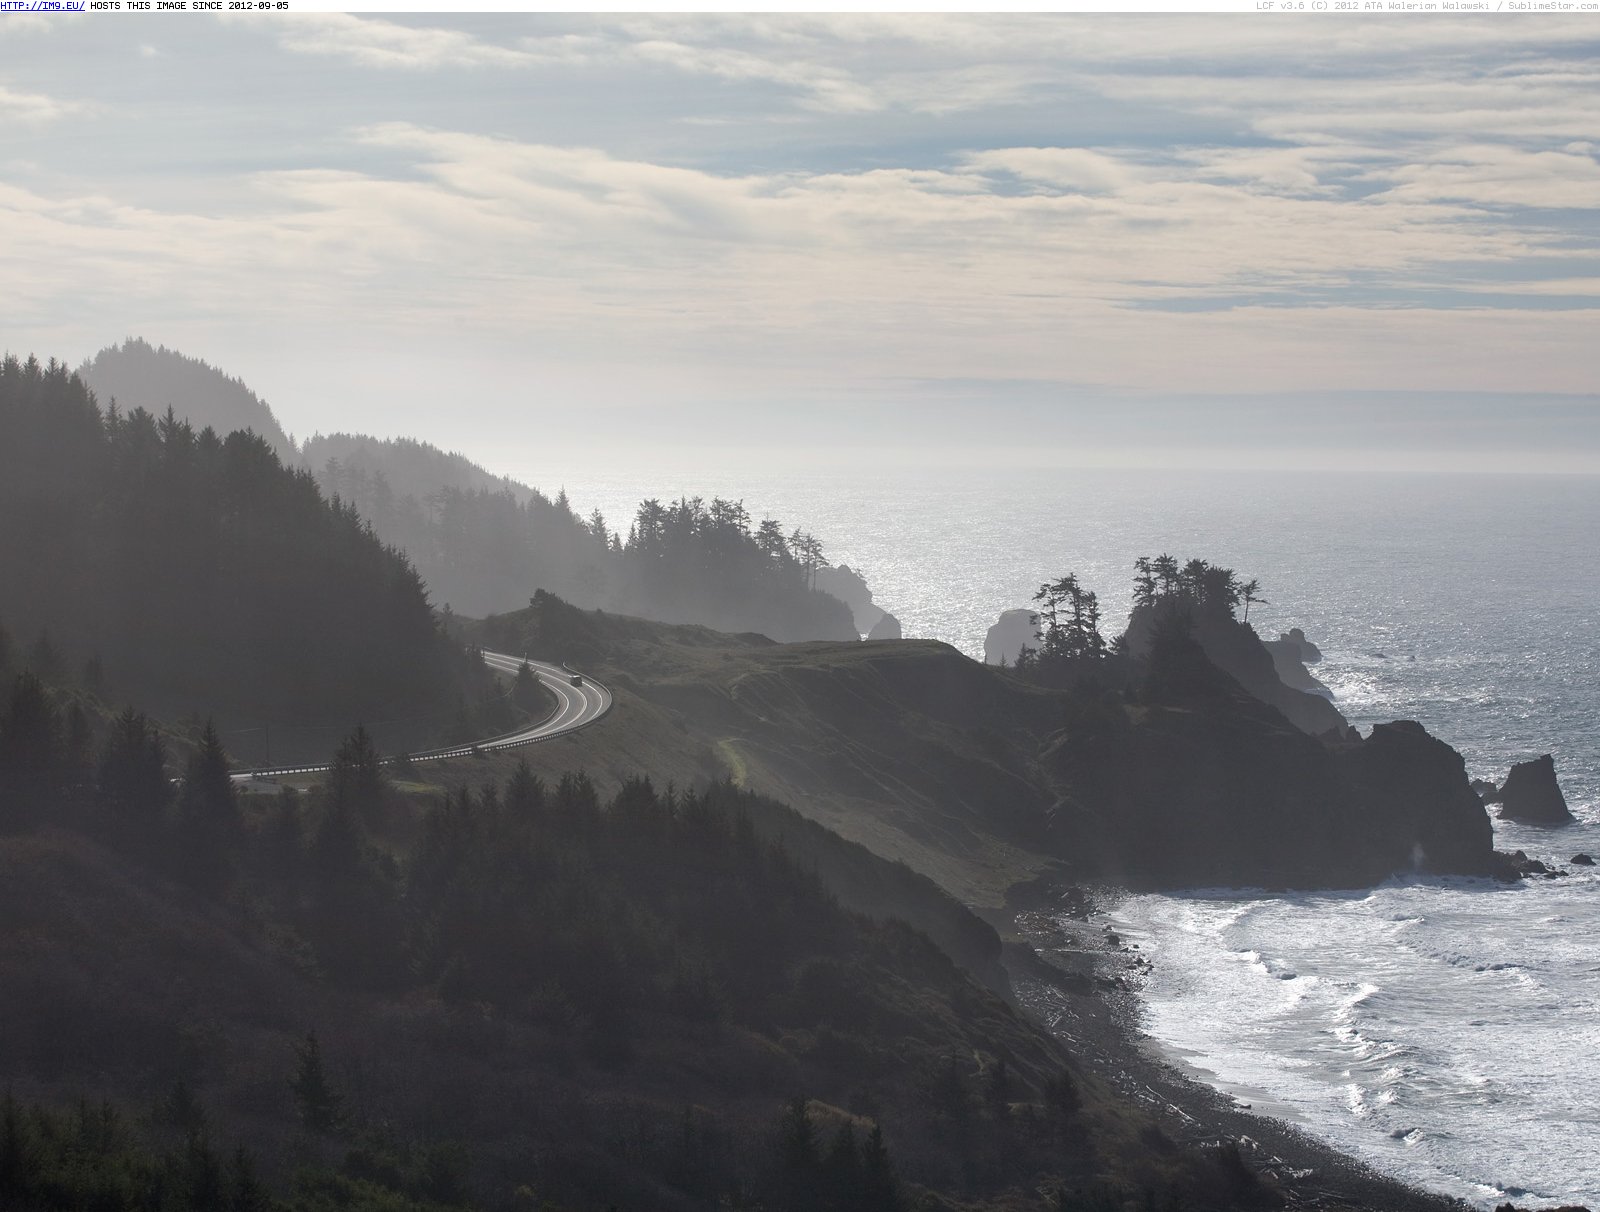 Oregon Coast Highway 101, North of Brookings, Oregon (in Beautiful photos and wallpapers)